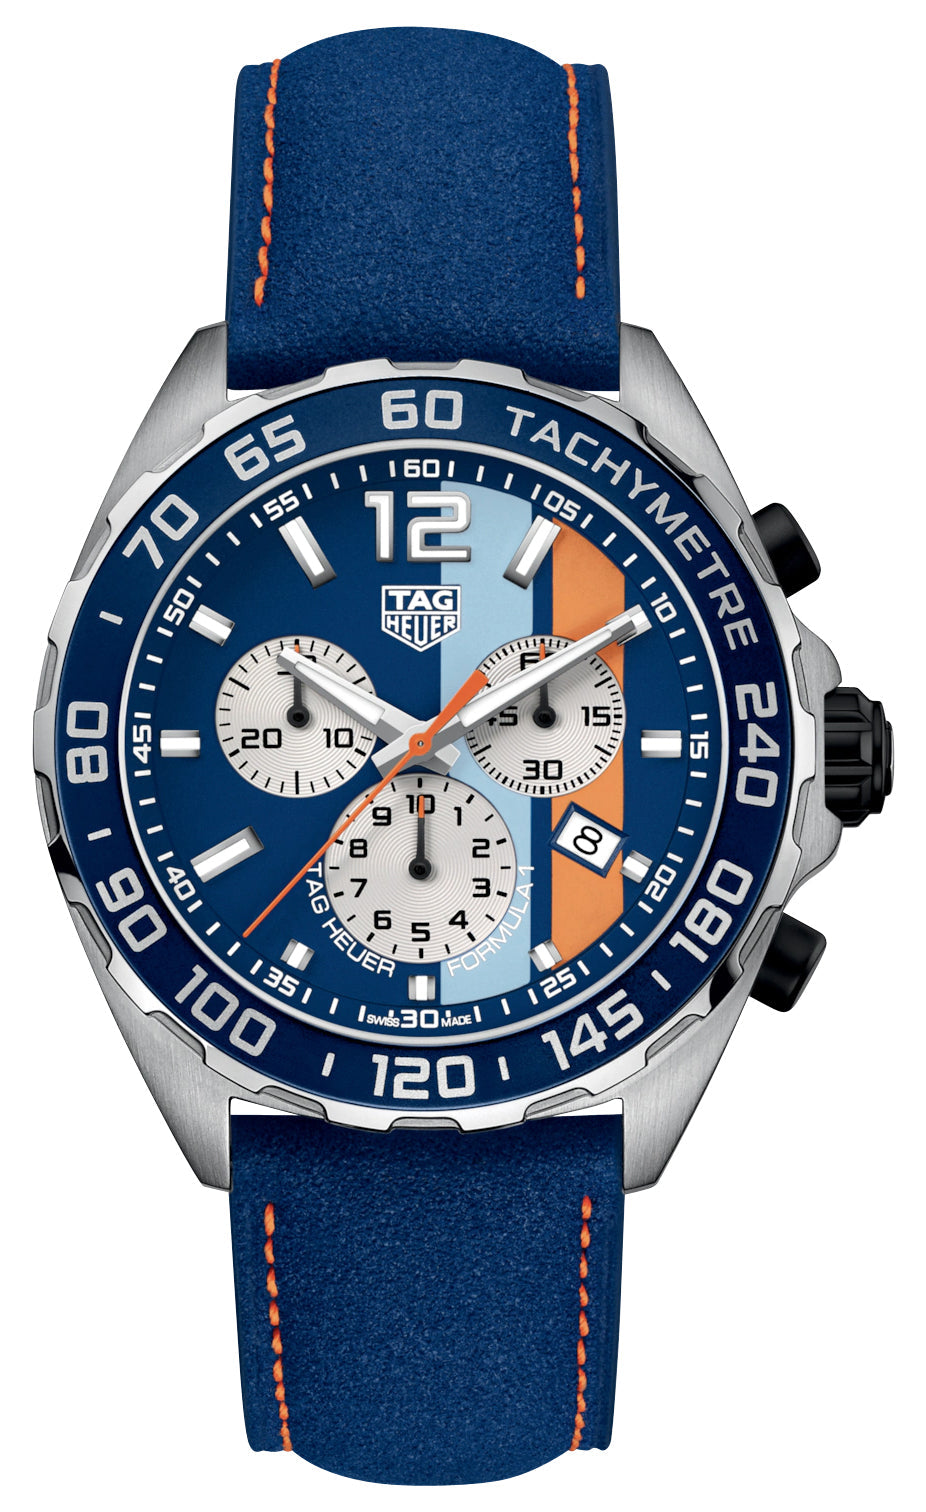 update alt-text with template Watches - Mens-Tag Heuer-CAZ101N.FC8243-40 - 45 mm, blue, chronograph, date, divers, Formula 1, leather, mens, menswatches, new arrivals, orange, product_ContactUs, round, rpSKU_CAZ101AB.BA0842, rpSKU_CAZ101AC.FT8024, rpSKU_CAZ101AG.FC8304, rpSKU_CAZ101AJ.FC6487, rpSKU_CAZ101AL.BA0842, seconds sub-dial, special / limited edition, stainless steel case, swiss quartz, tachymeter, TAG Heuer, watches-Watches & Beyond